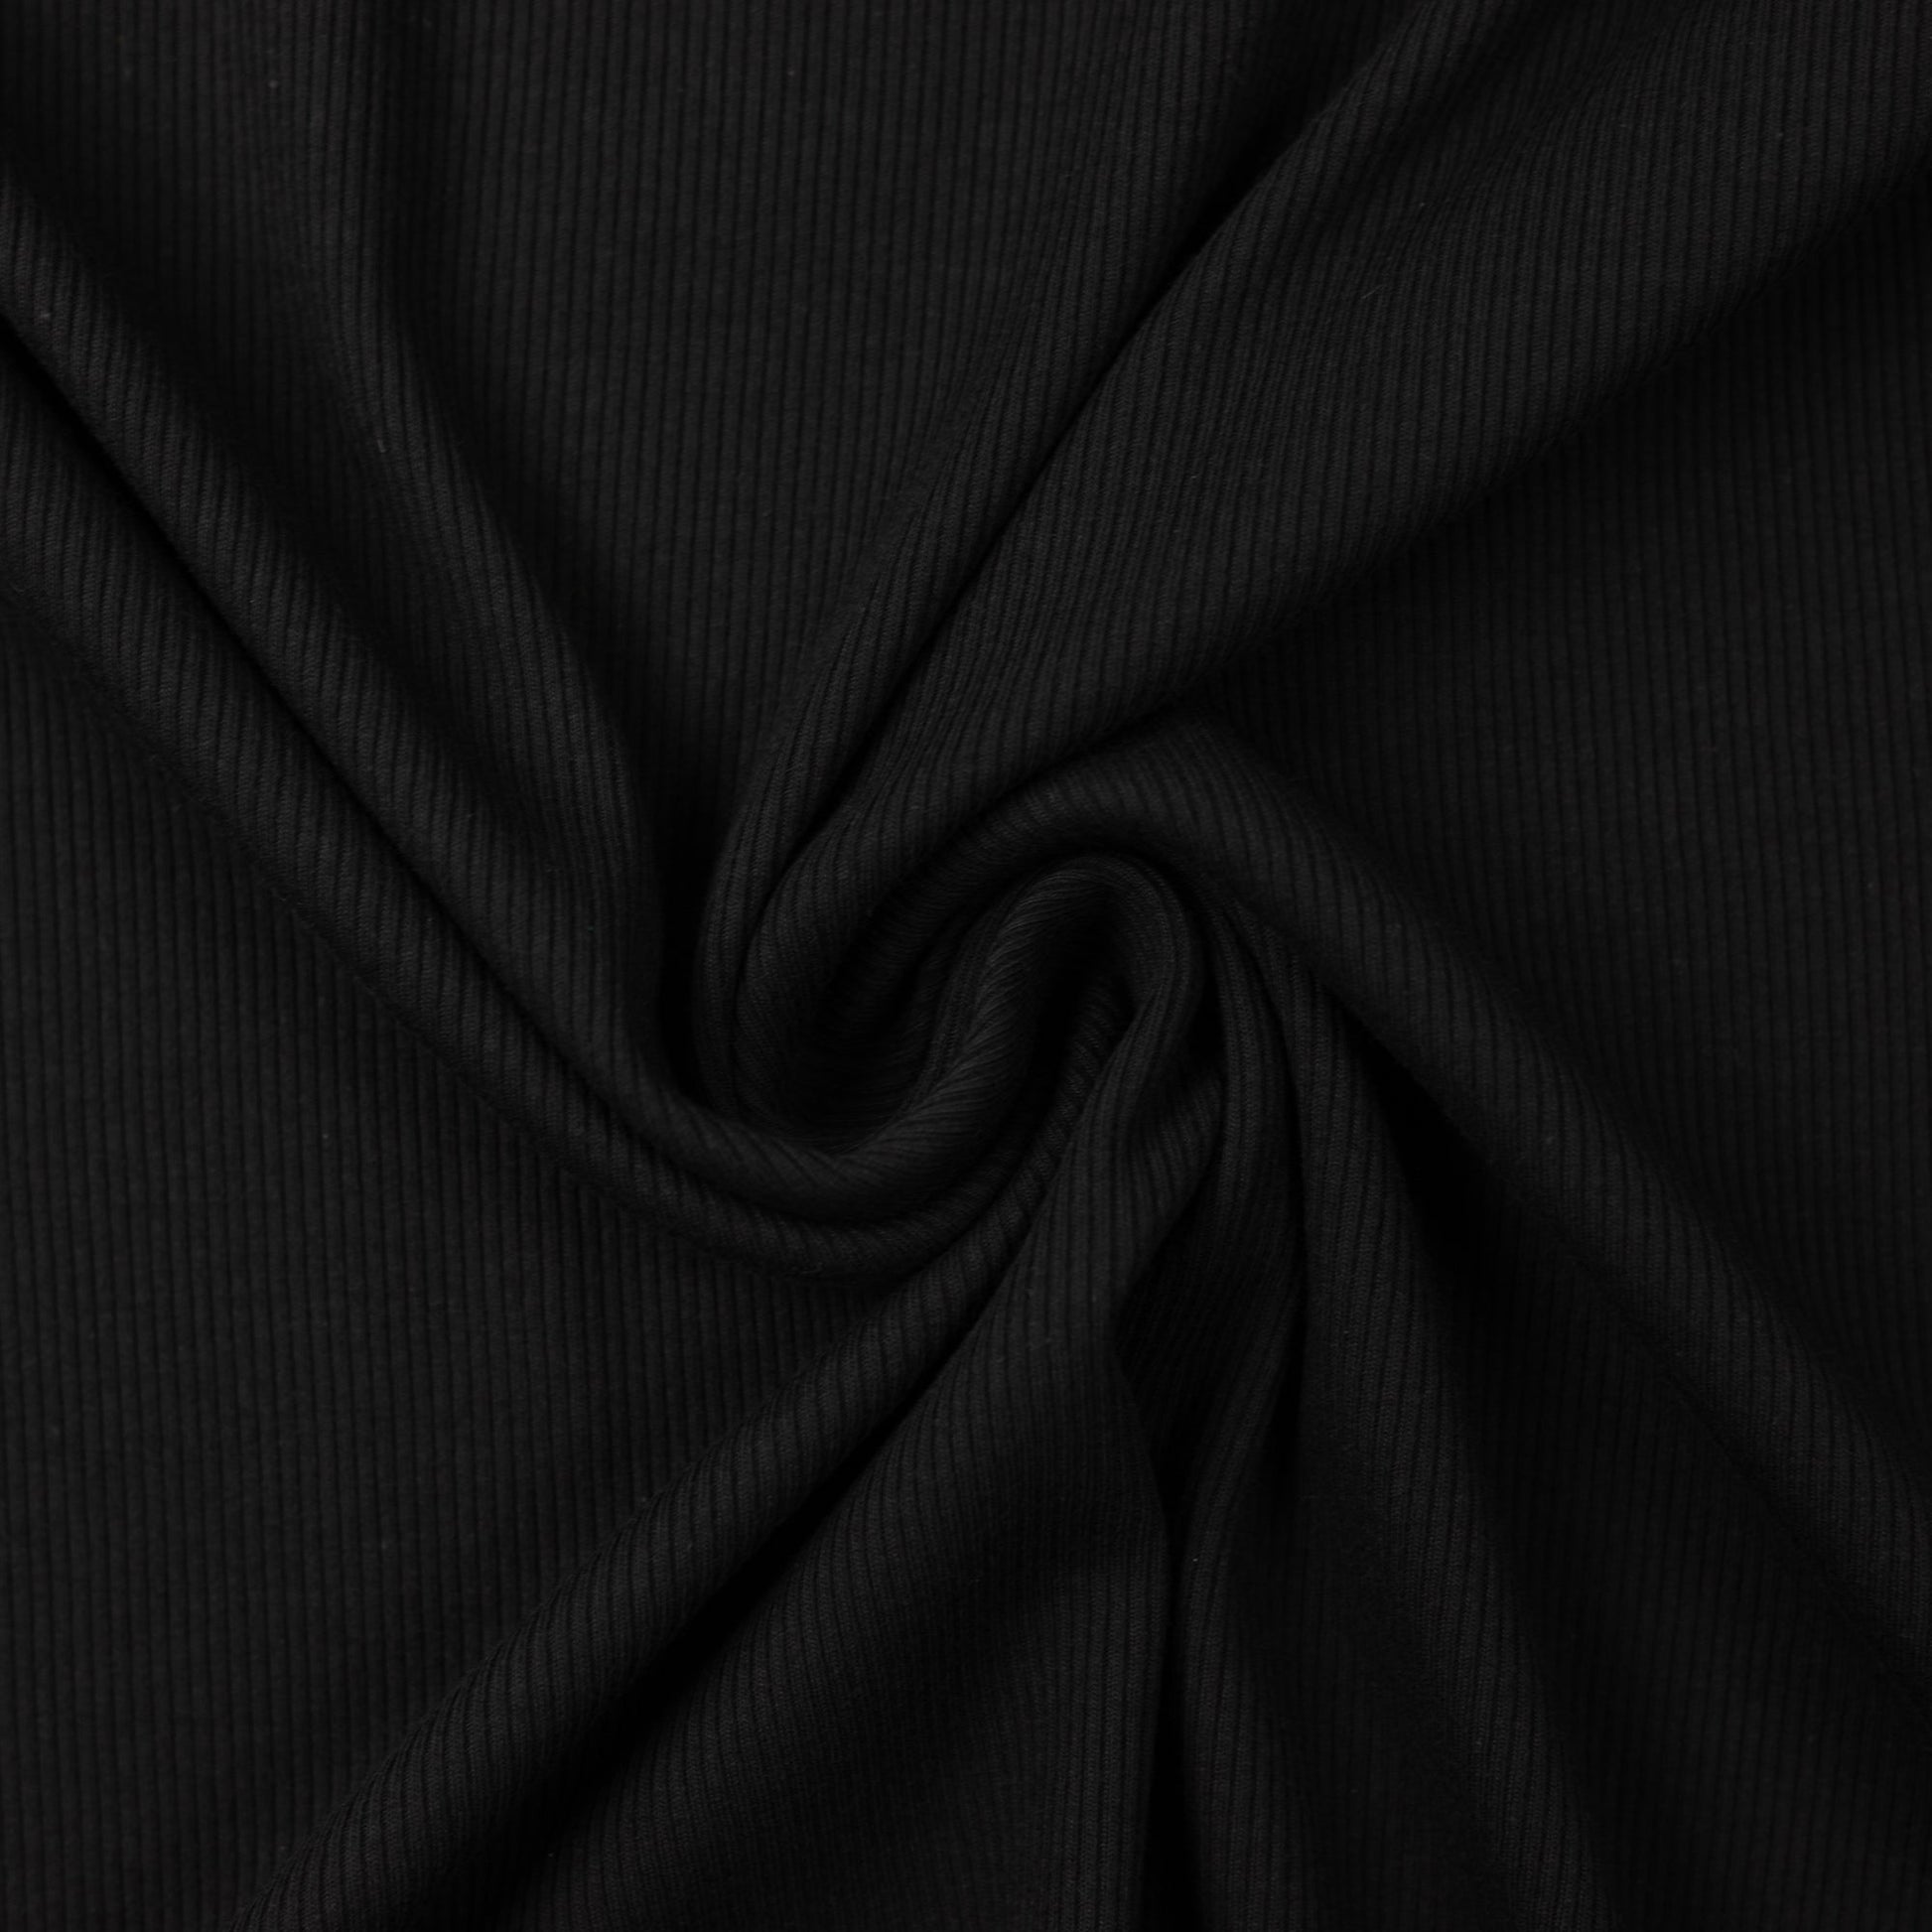 Swafing - Black - In Stock in Rib Knit - Available by Preorder in Euro Ribbing, Jersey, French Terry, Fleeced French Terry, Waffle - Little Rhody Sewing Co.